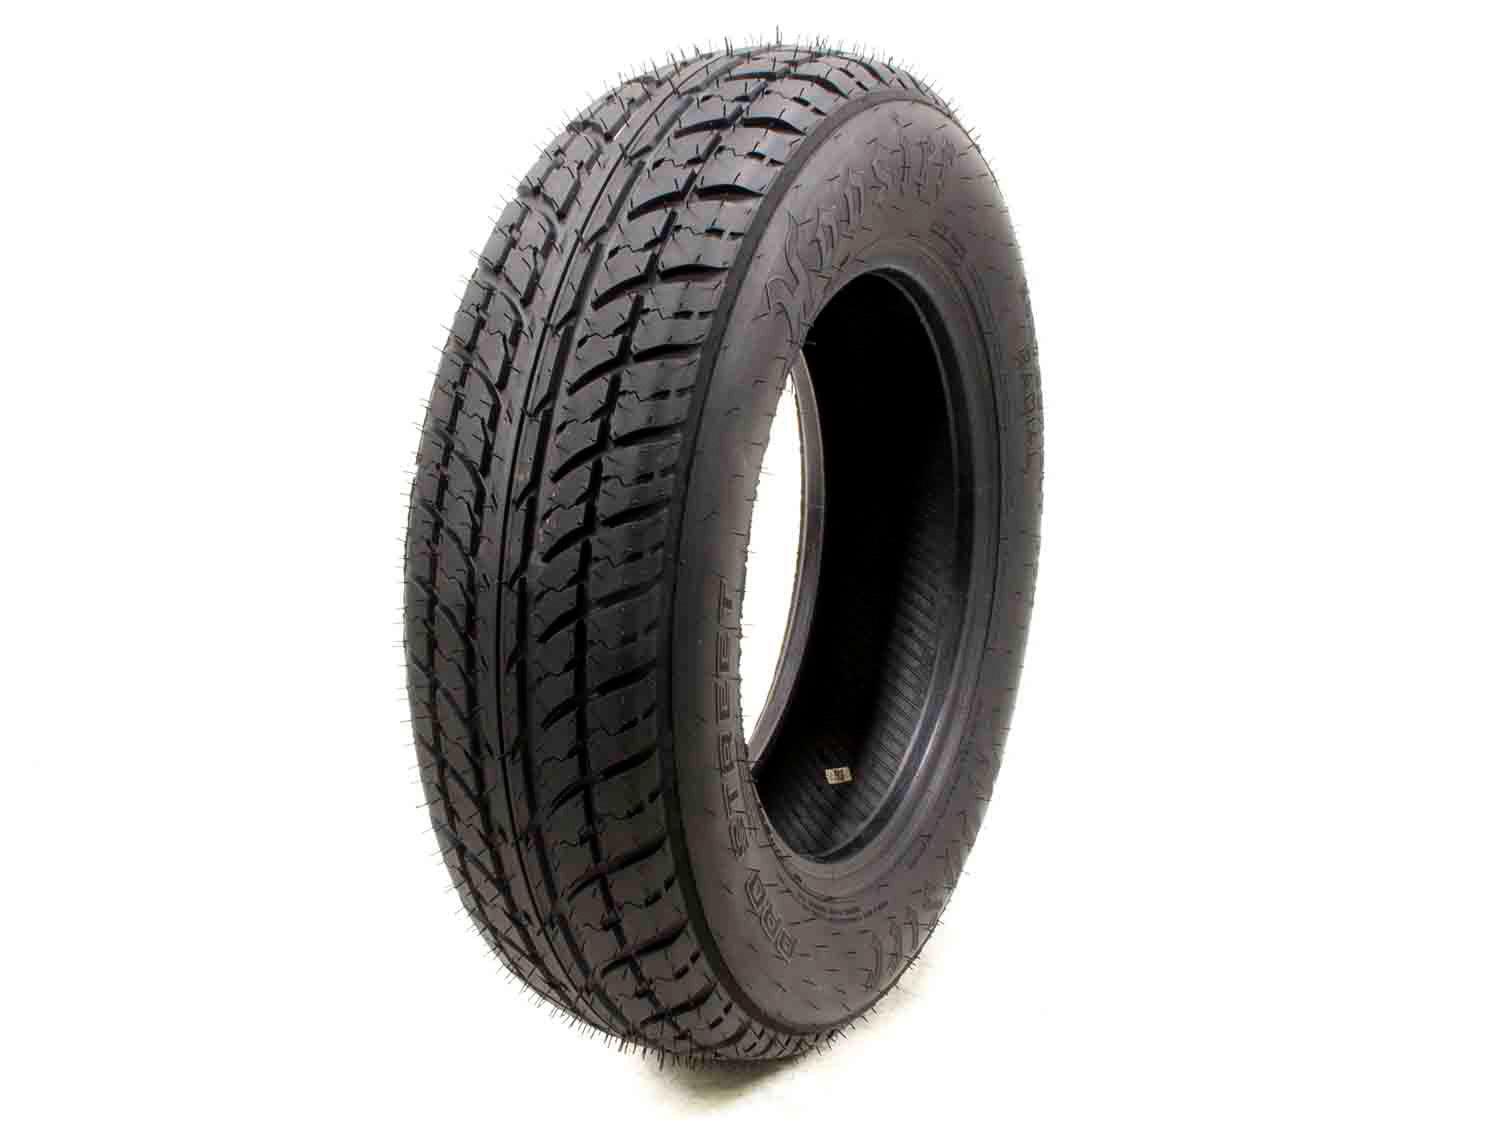 26/7.5R-15LT Pro Street Radial Front Tire - Burlile Performance Products